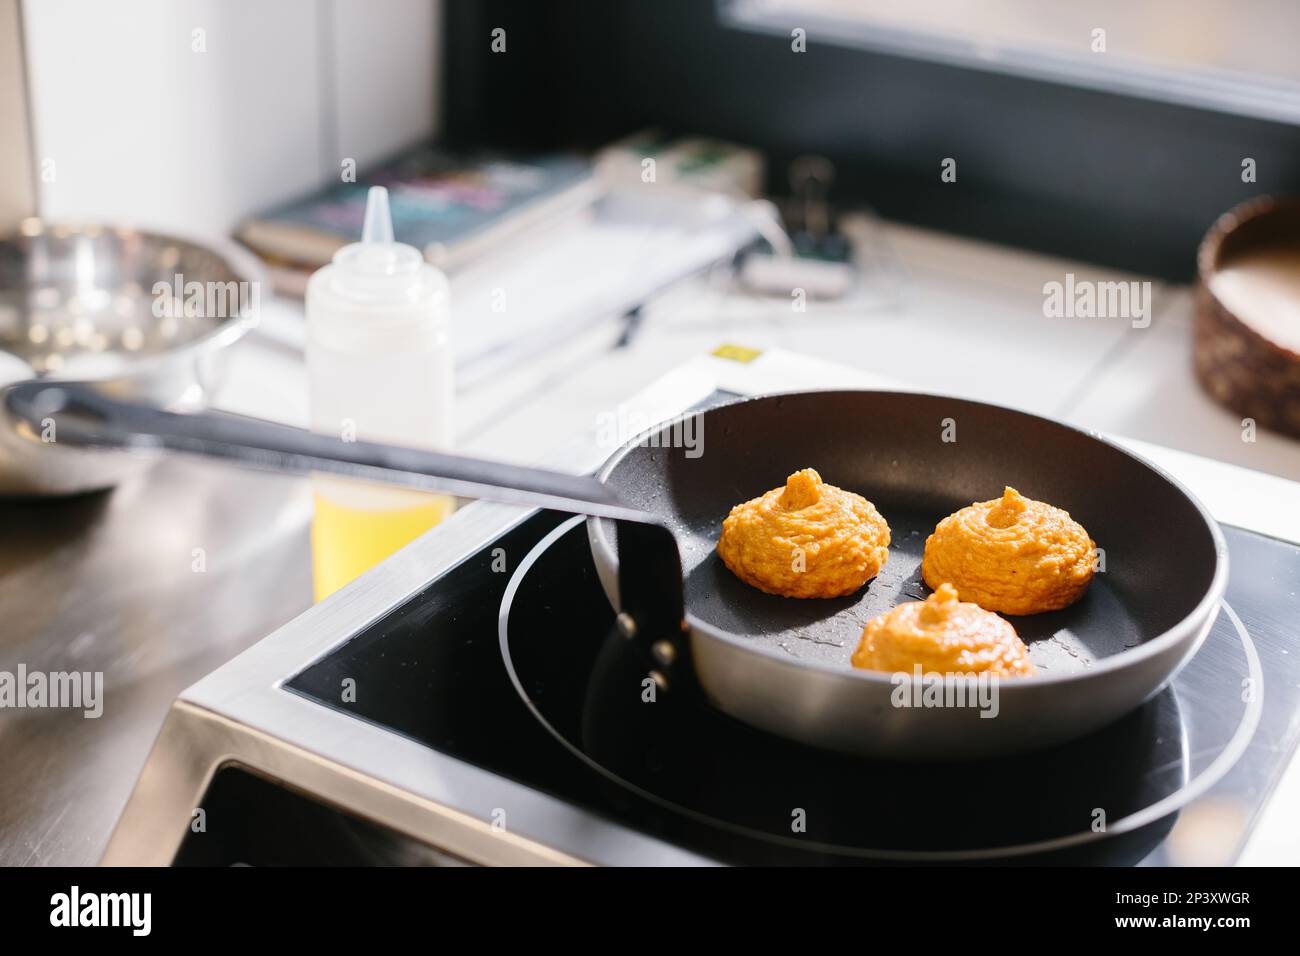 Carrot pancakes are fried in a pan, close-up. Stock Photo